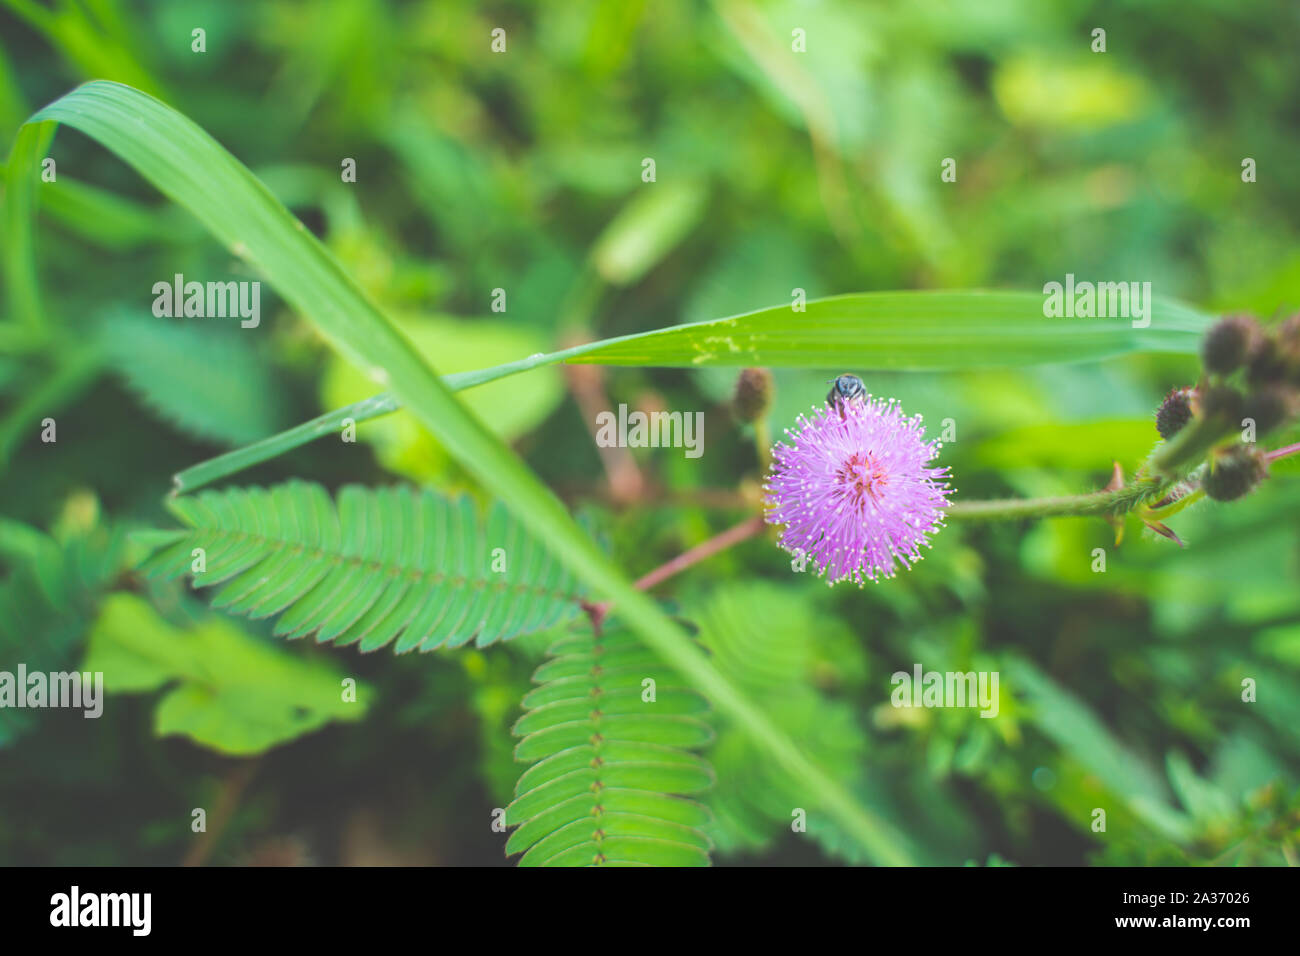 The Closeup to Sensitive Plant Flower, Mimosa Pudica. Stock Photo